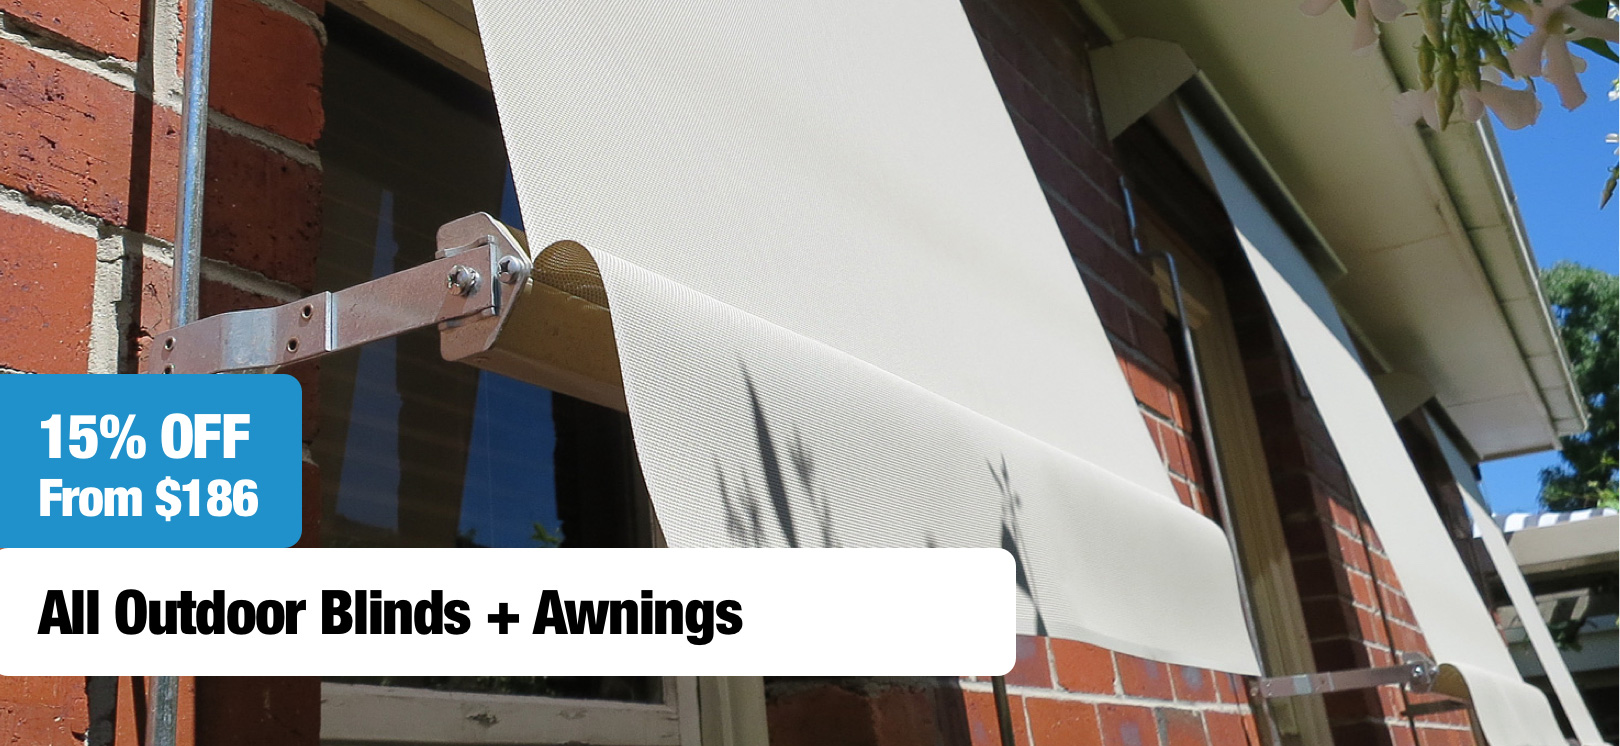 15% Off All Outdoor Blinds + Awnings From $186